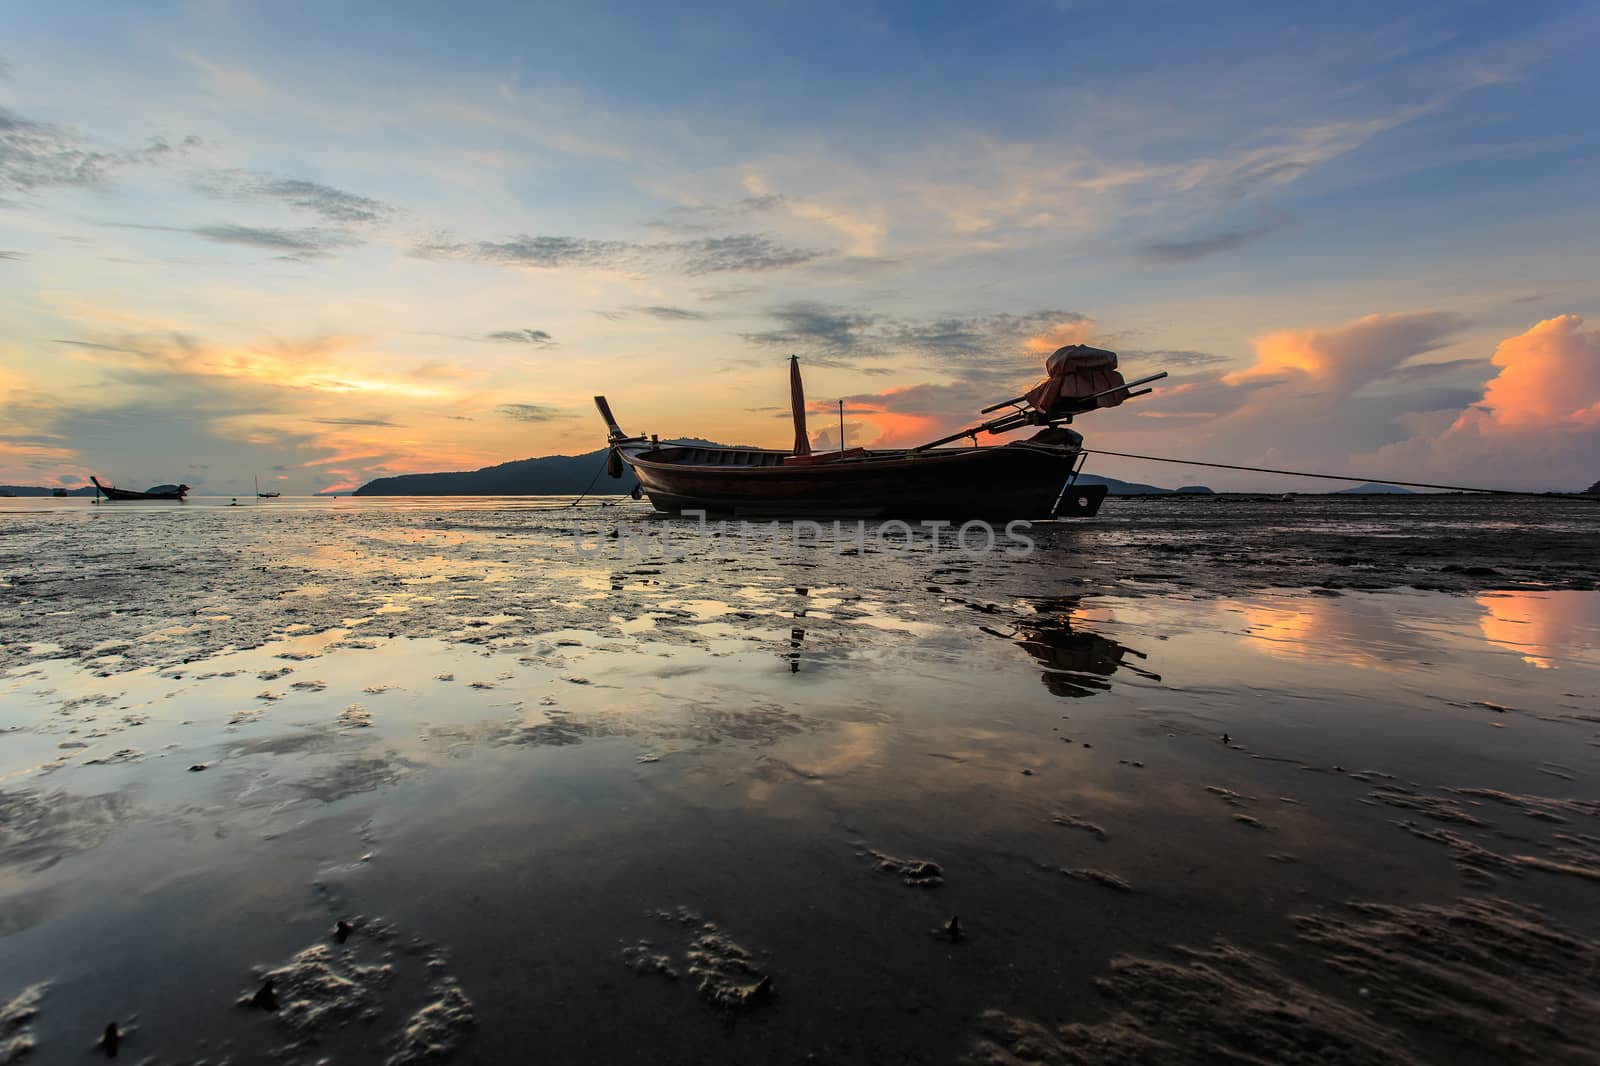 Silhouettes of longtail boat and sunrise in Phuket, Thailand